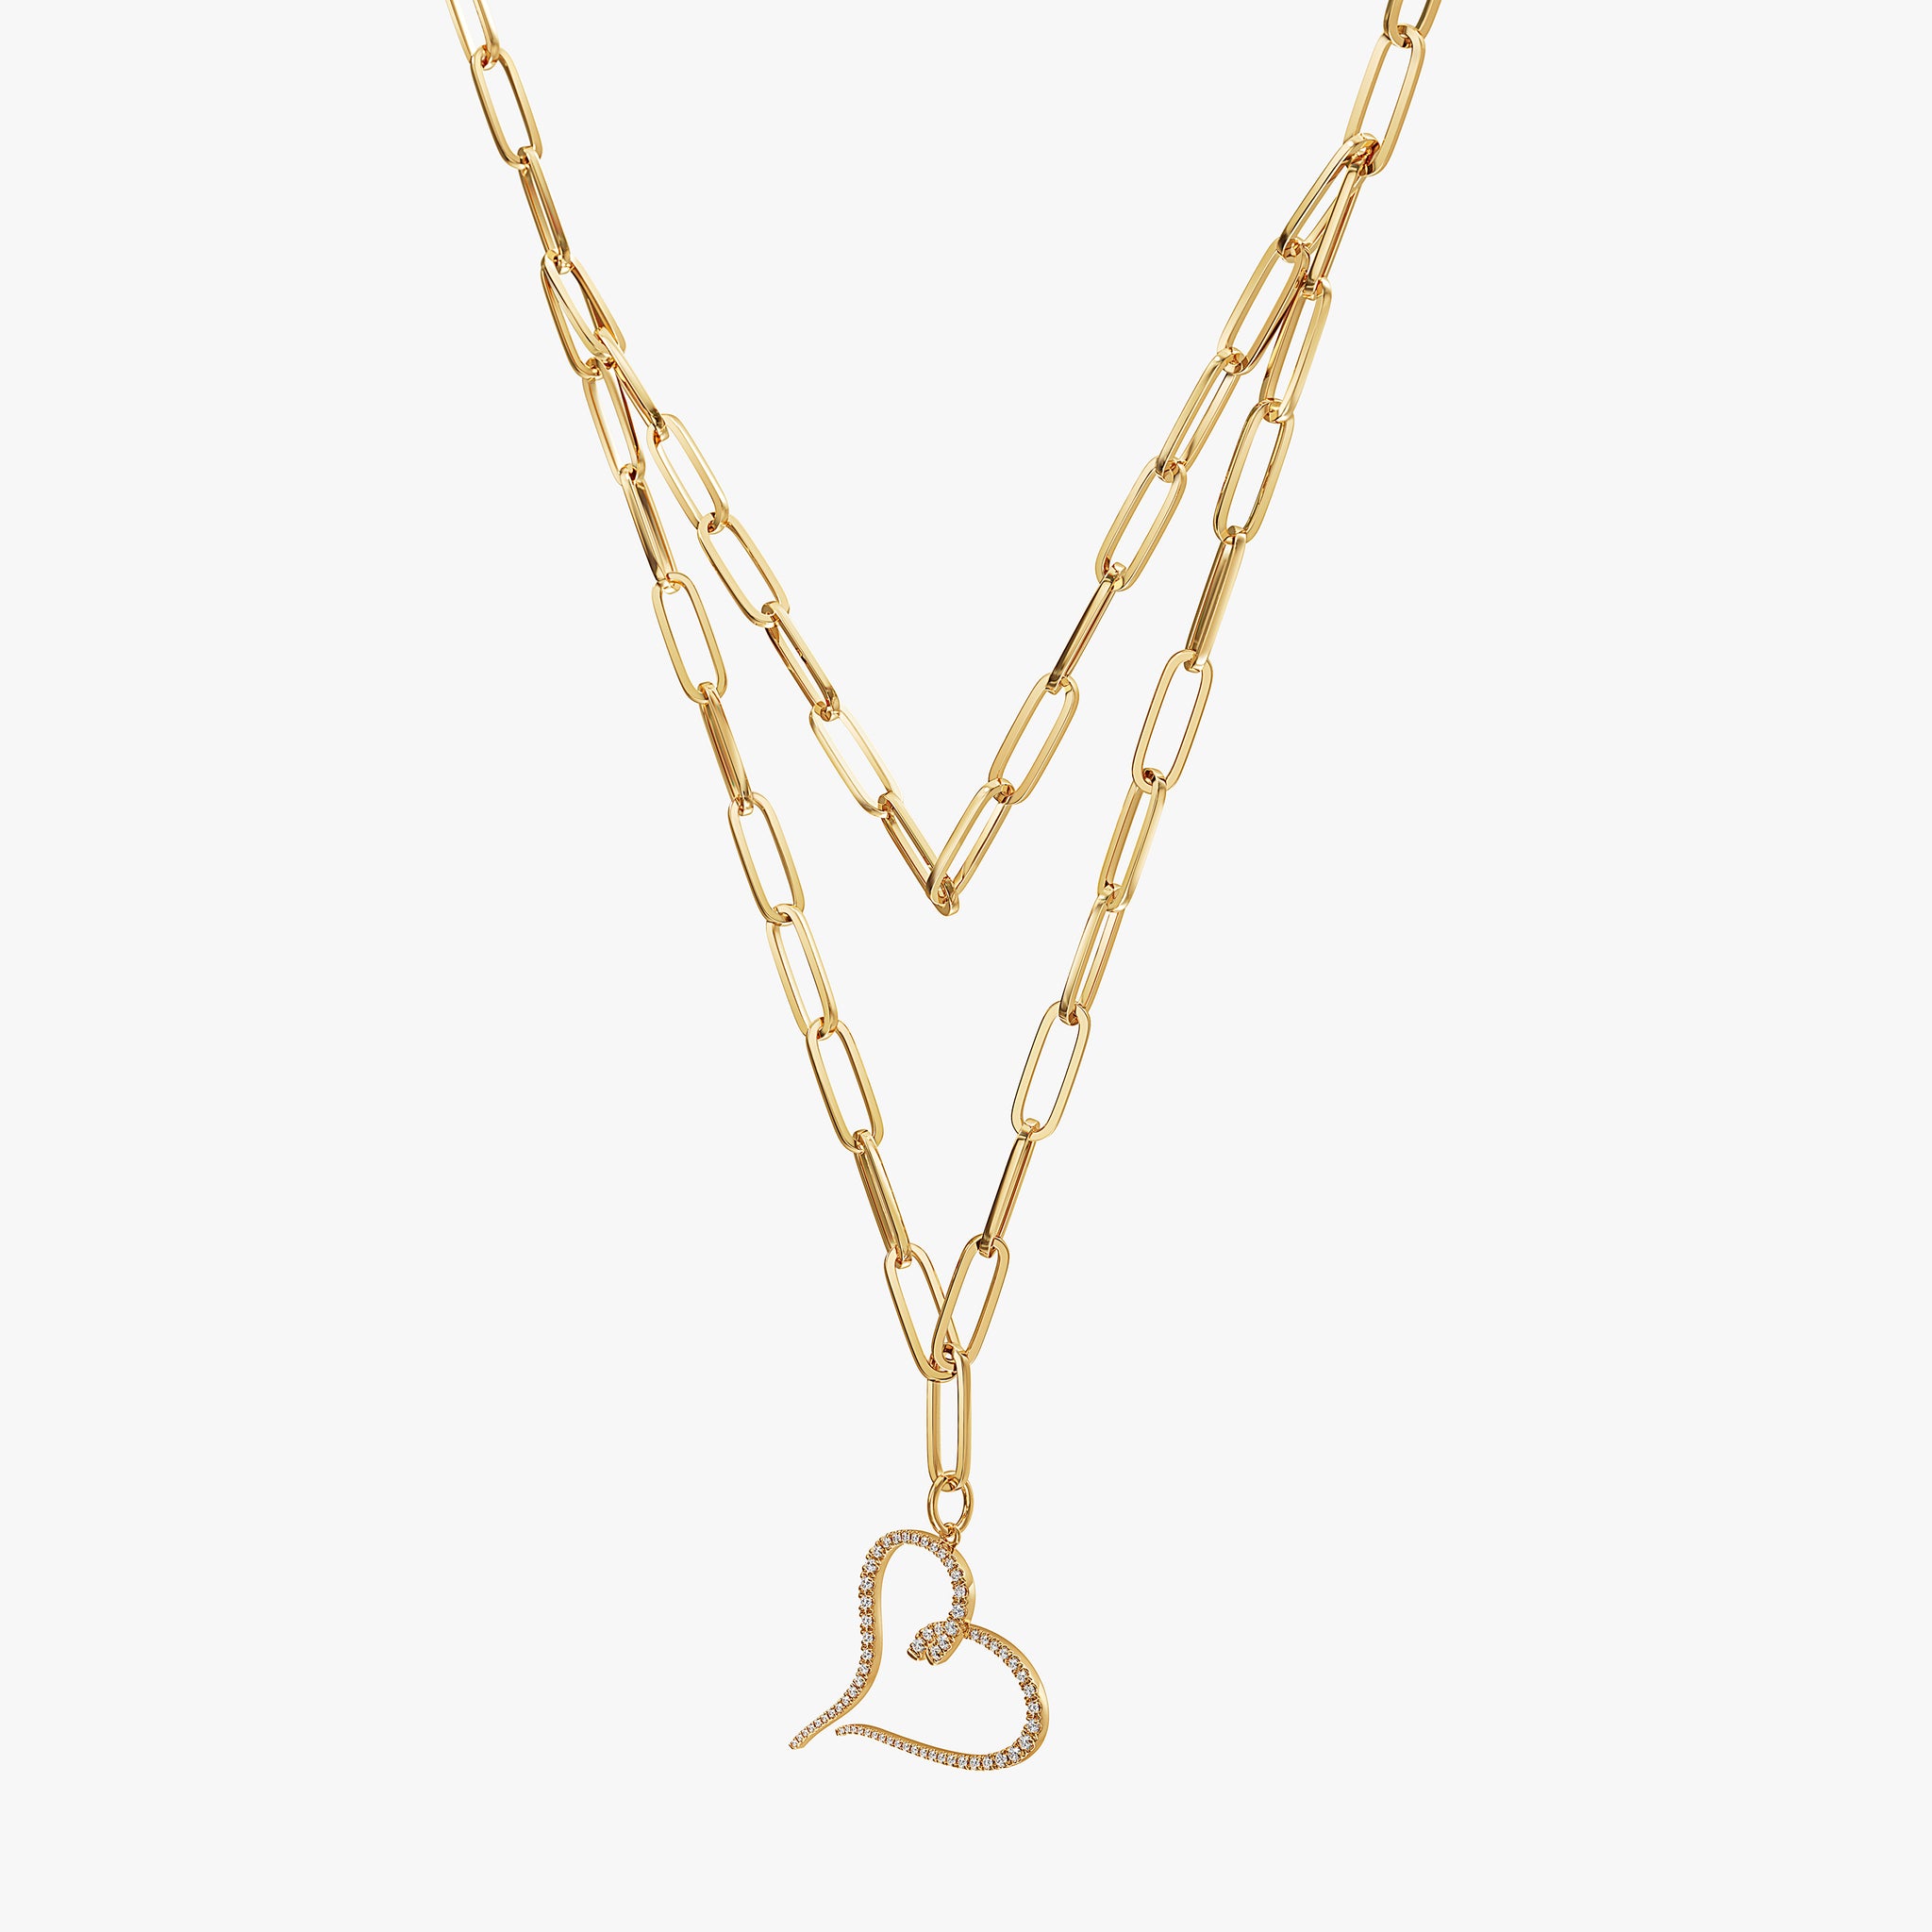 J'EVAR 14KT Yellow Gold Two Row Paperclip Heart ALTR Lab Grown Diamond Necklace Perspective View